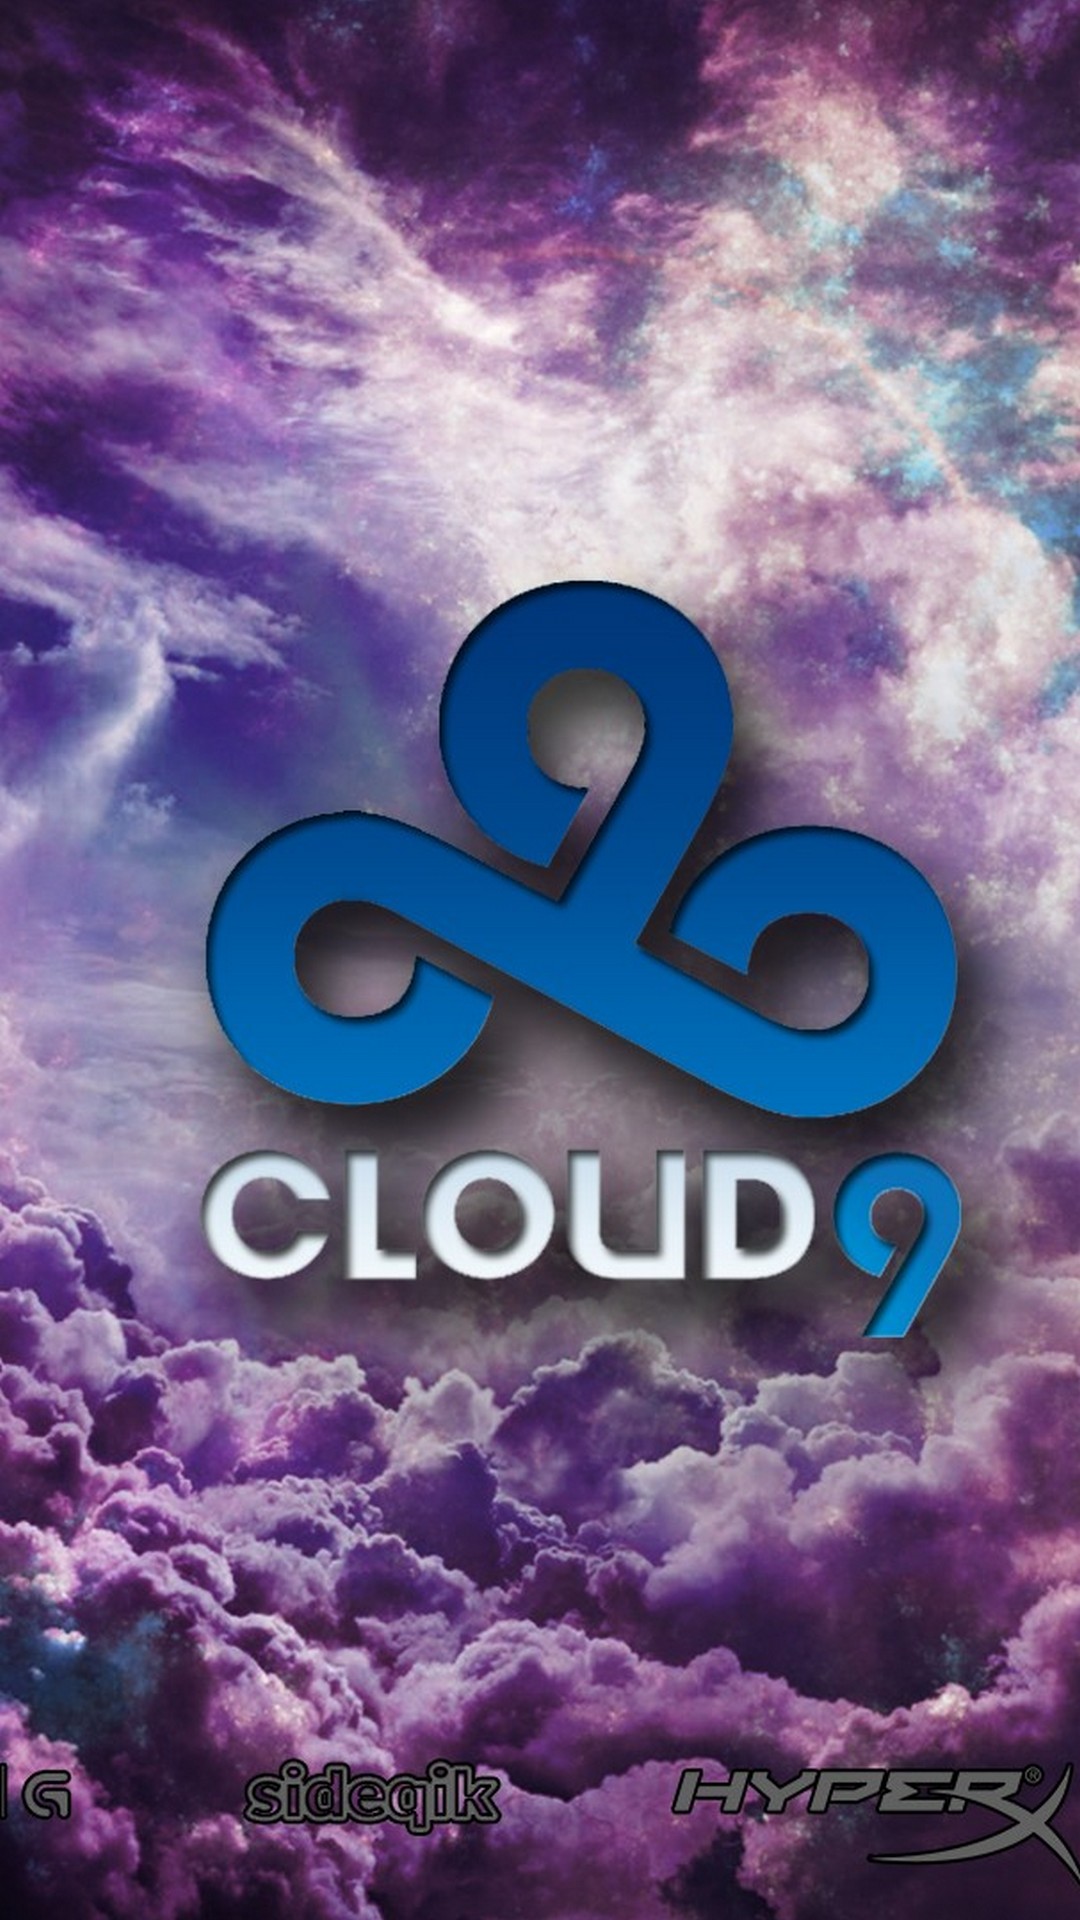 Wallpapers Cloud9 with HD resolution 1080x1920